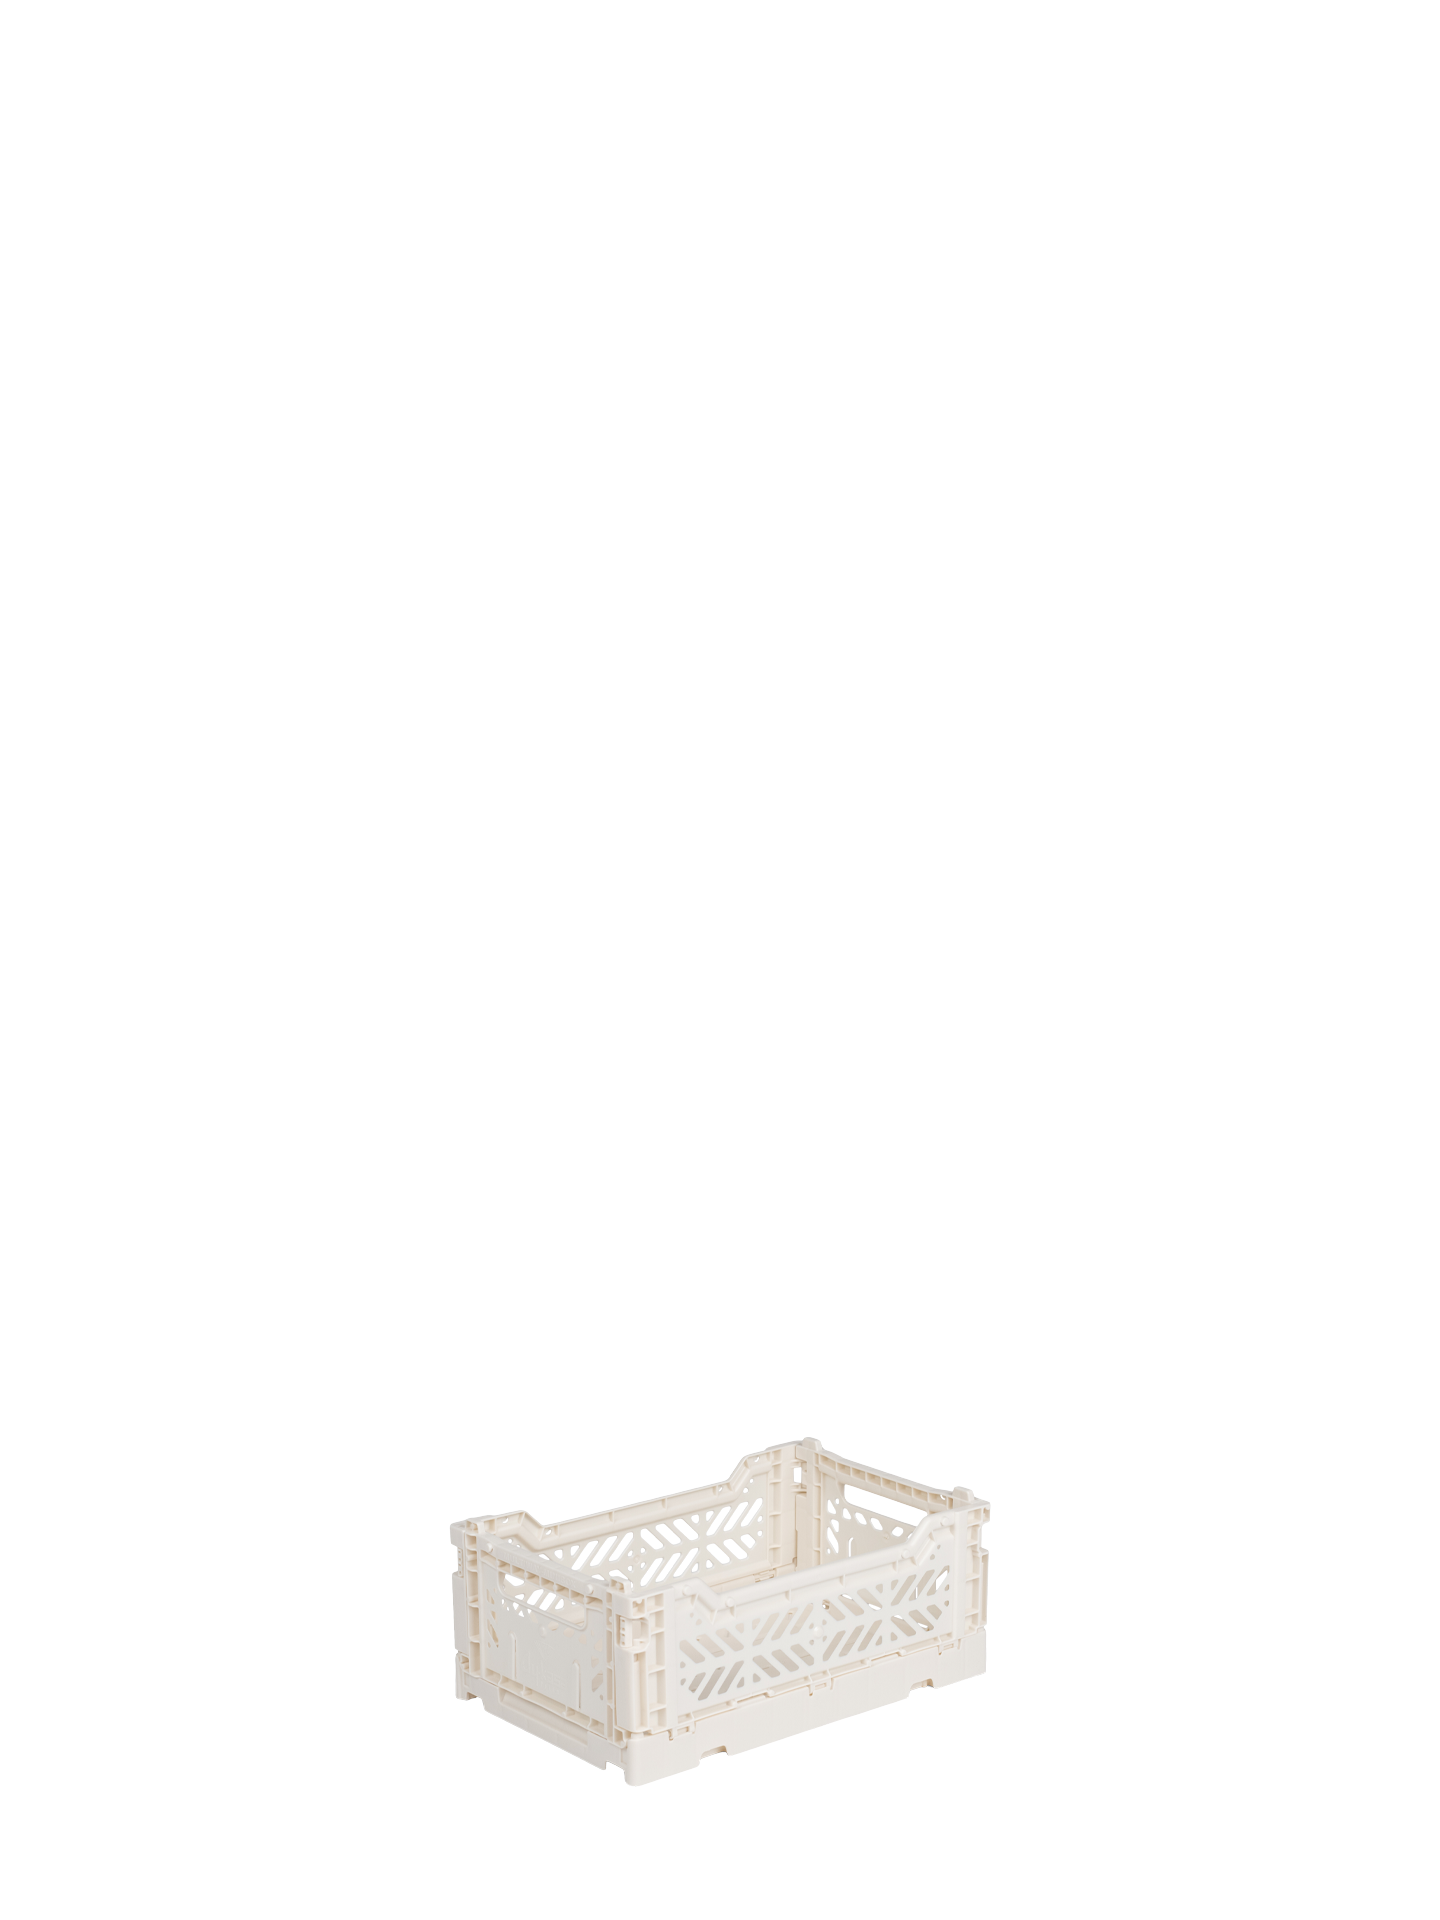 Mini Aykasa crate in off-white coconut milk stacks and folds